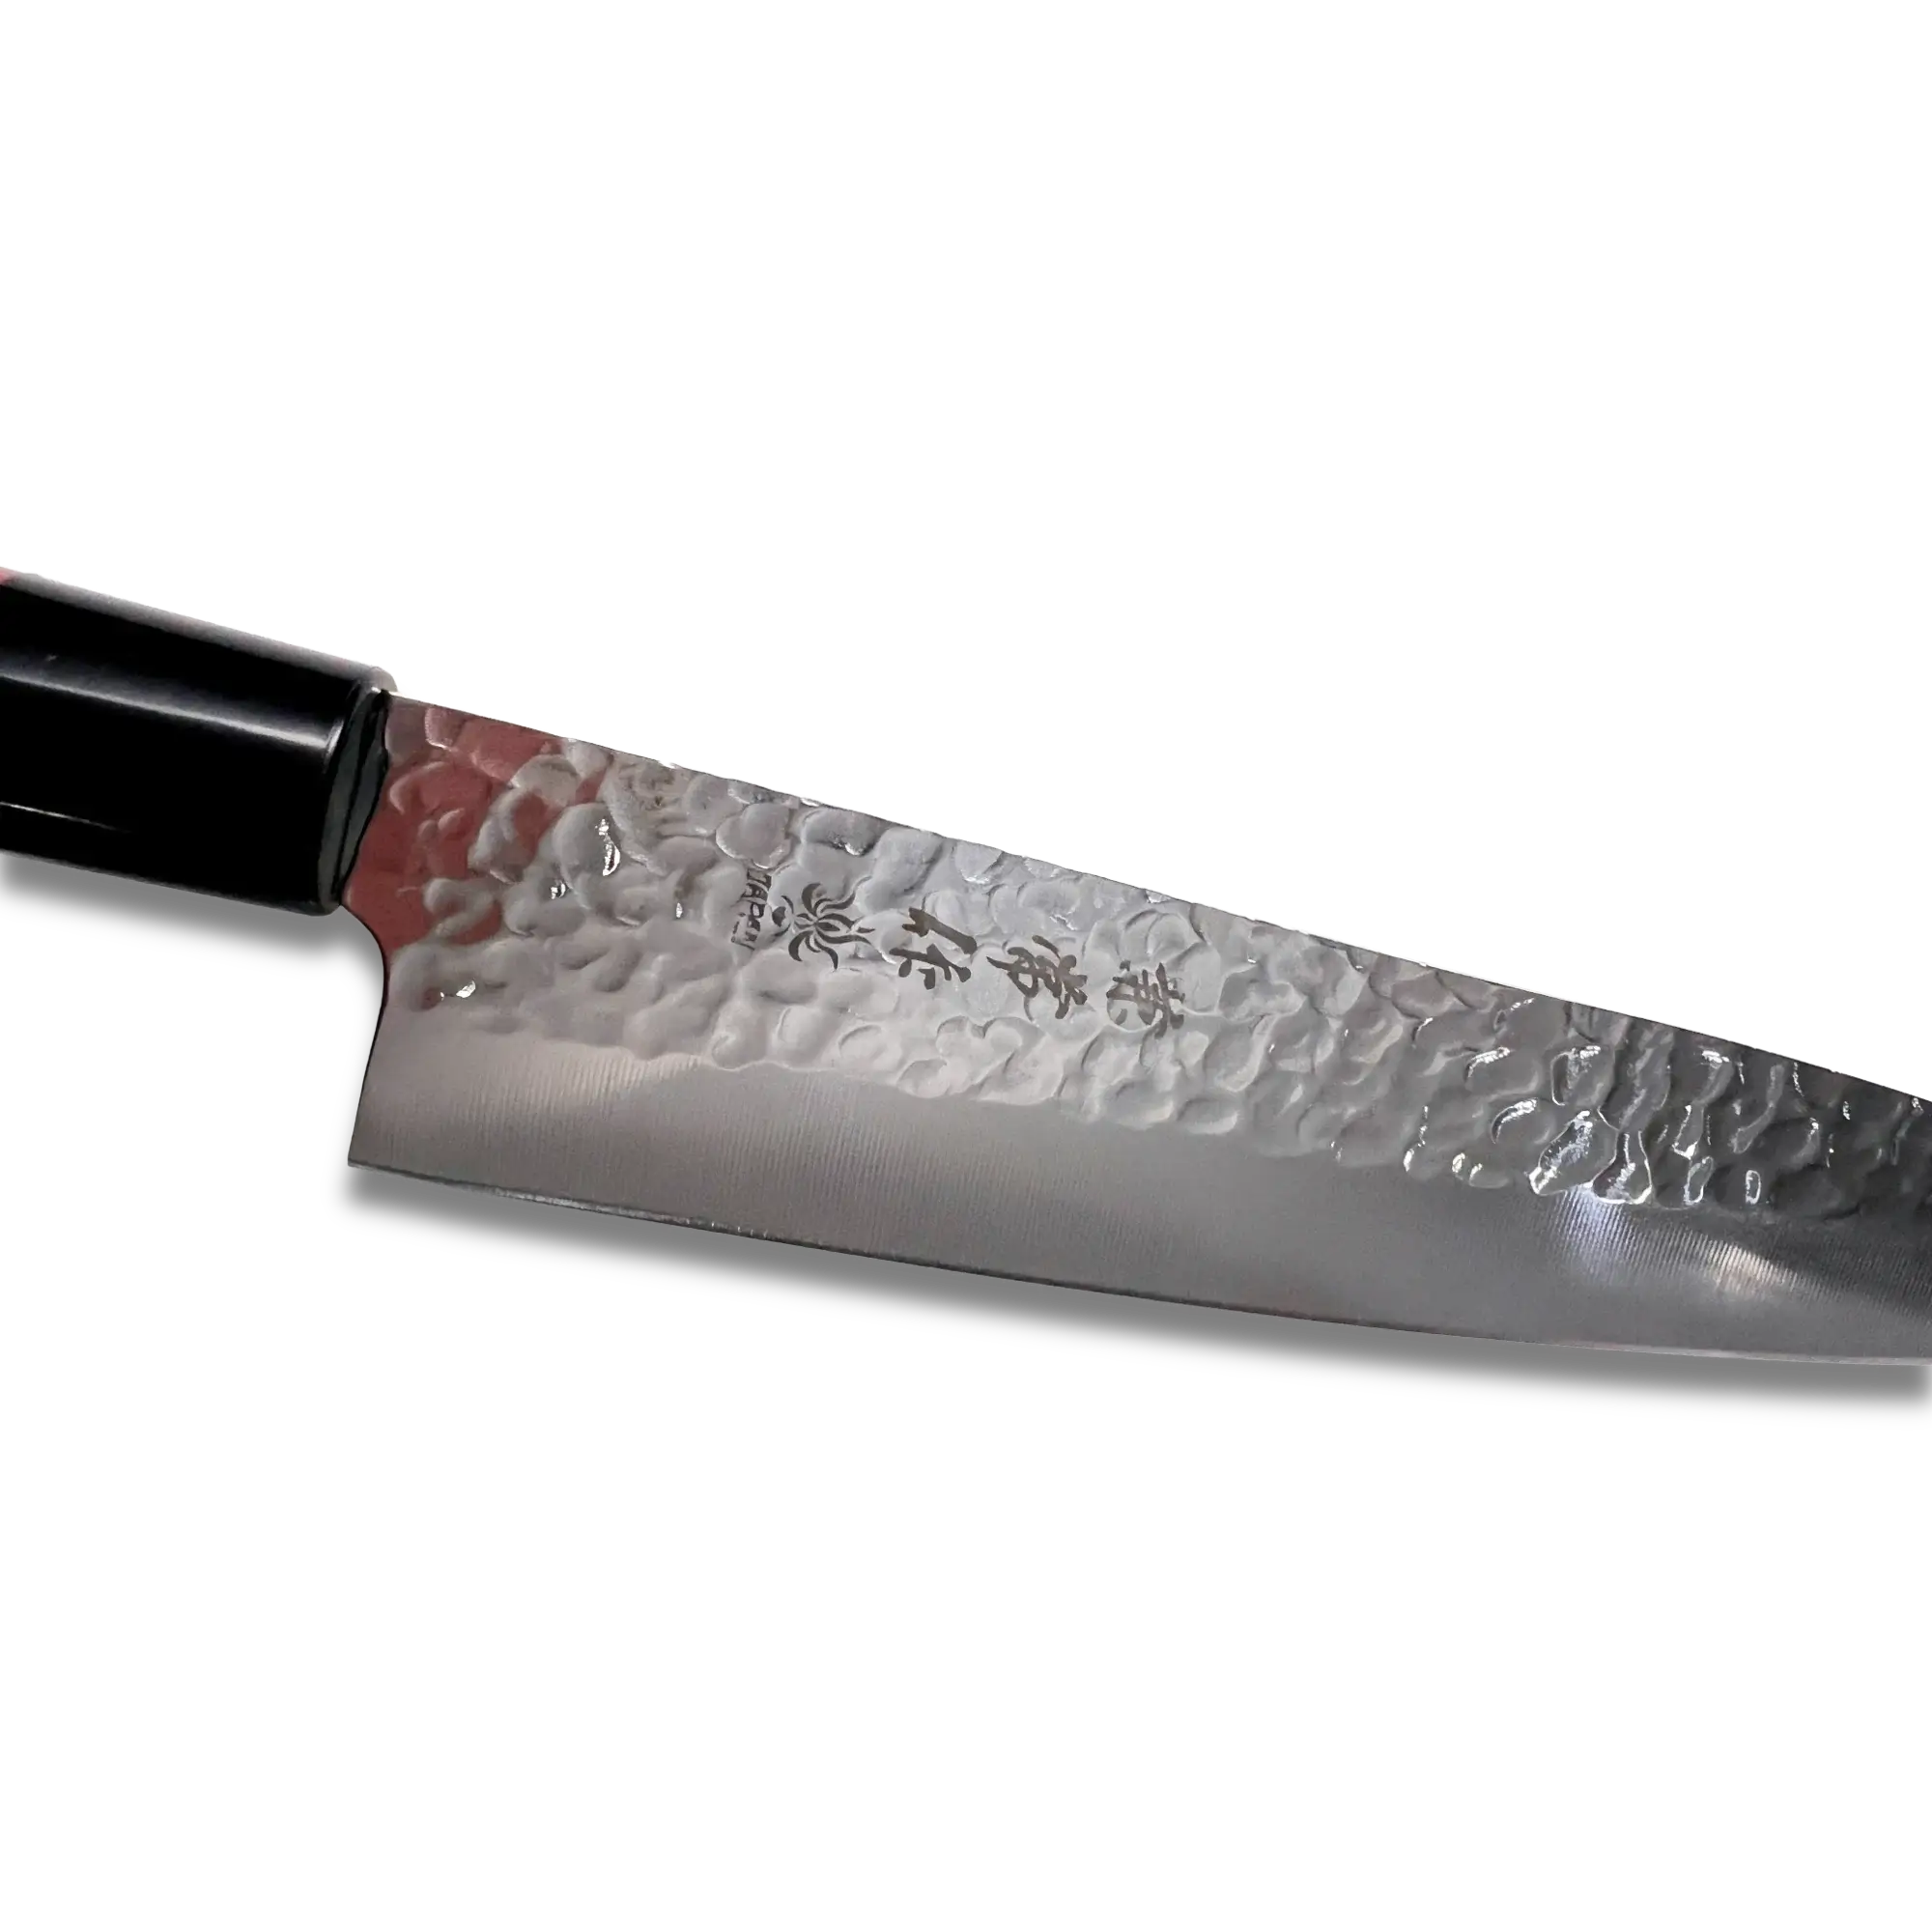 KC-950 Gyuto/Chef Knife 210mm | Made in Japan